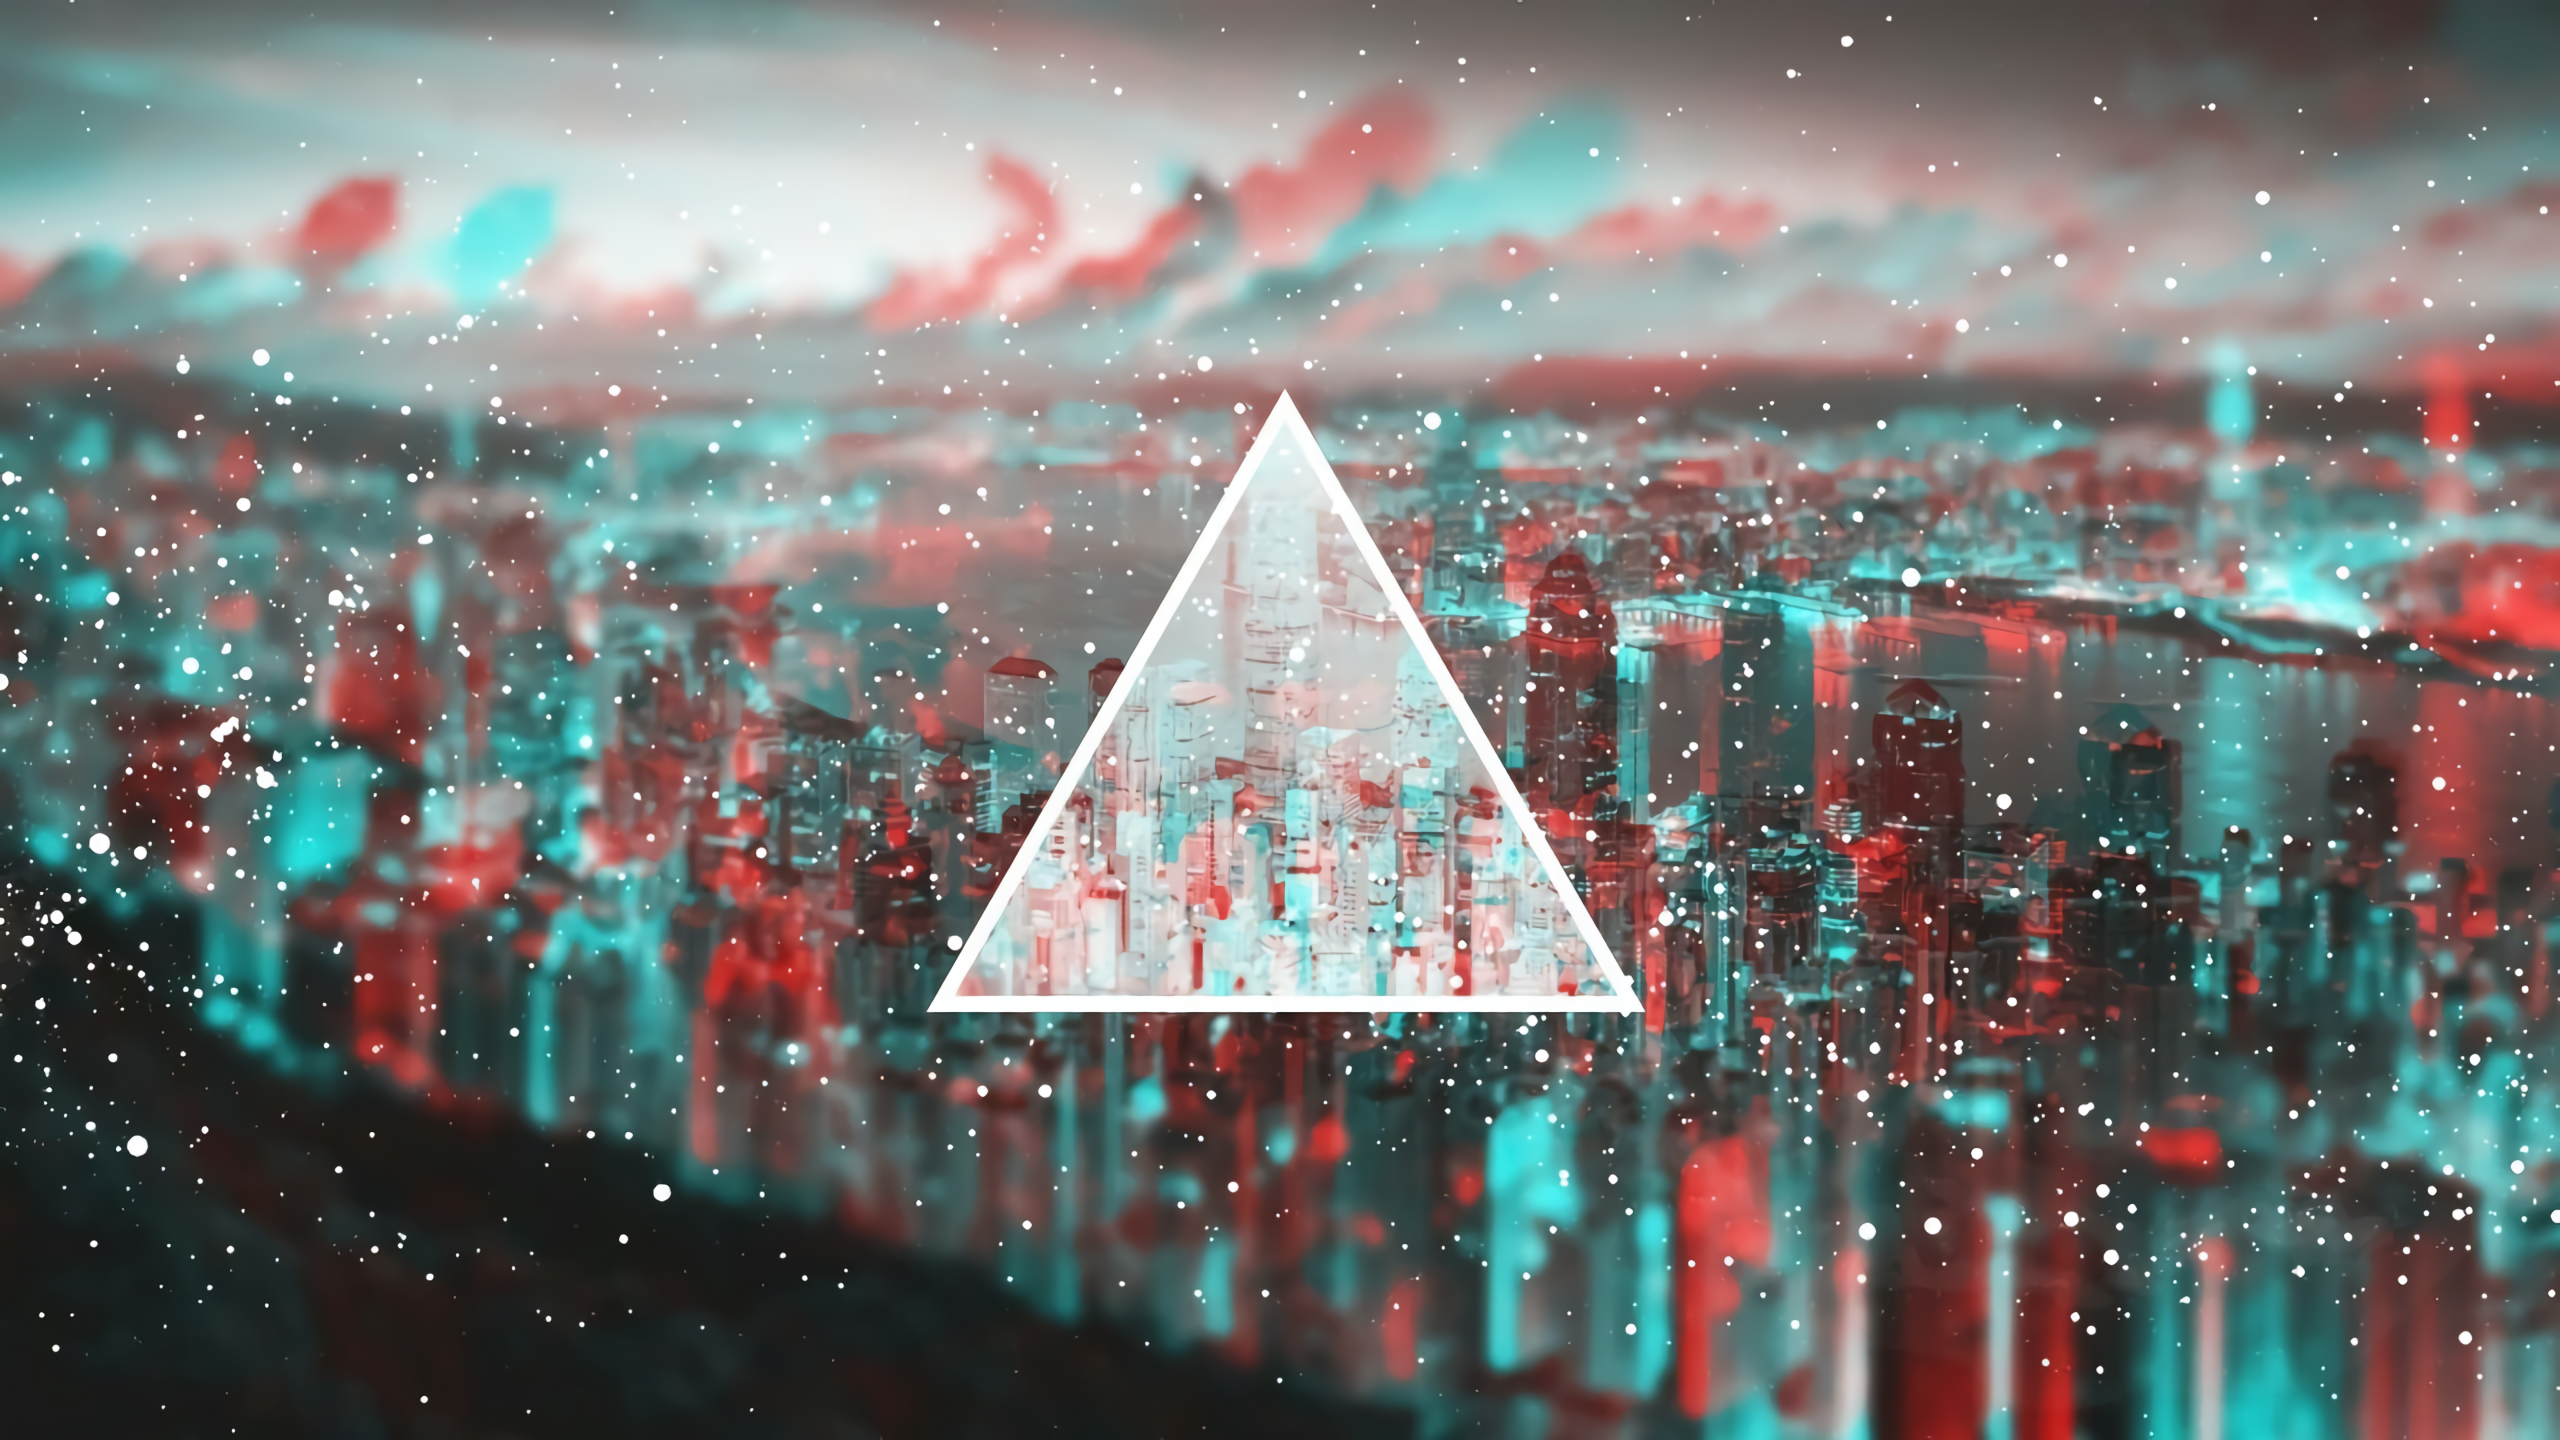 City Triangle Colorful Inverted Digital Digital Art Floating Particles 2560x1440